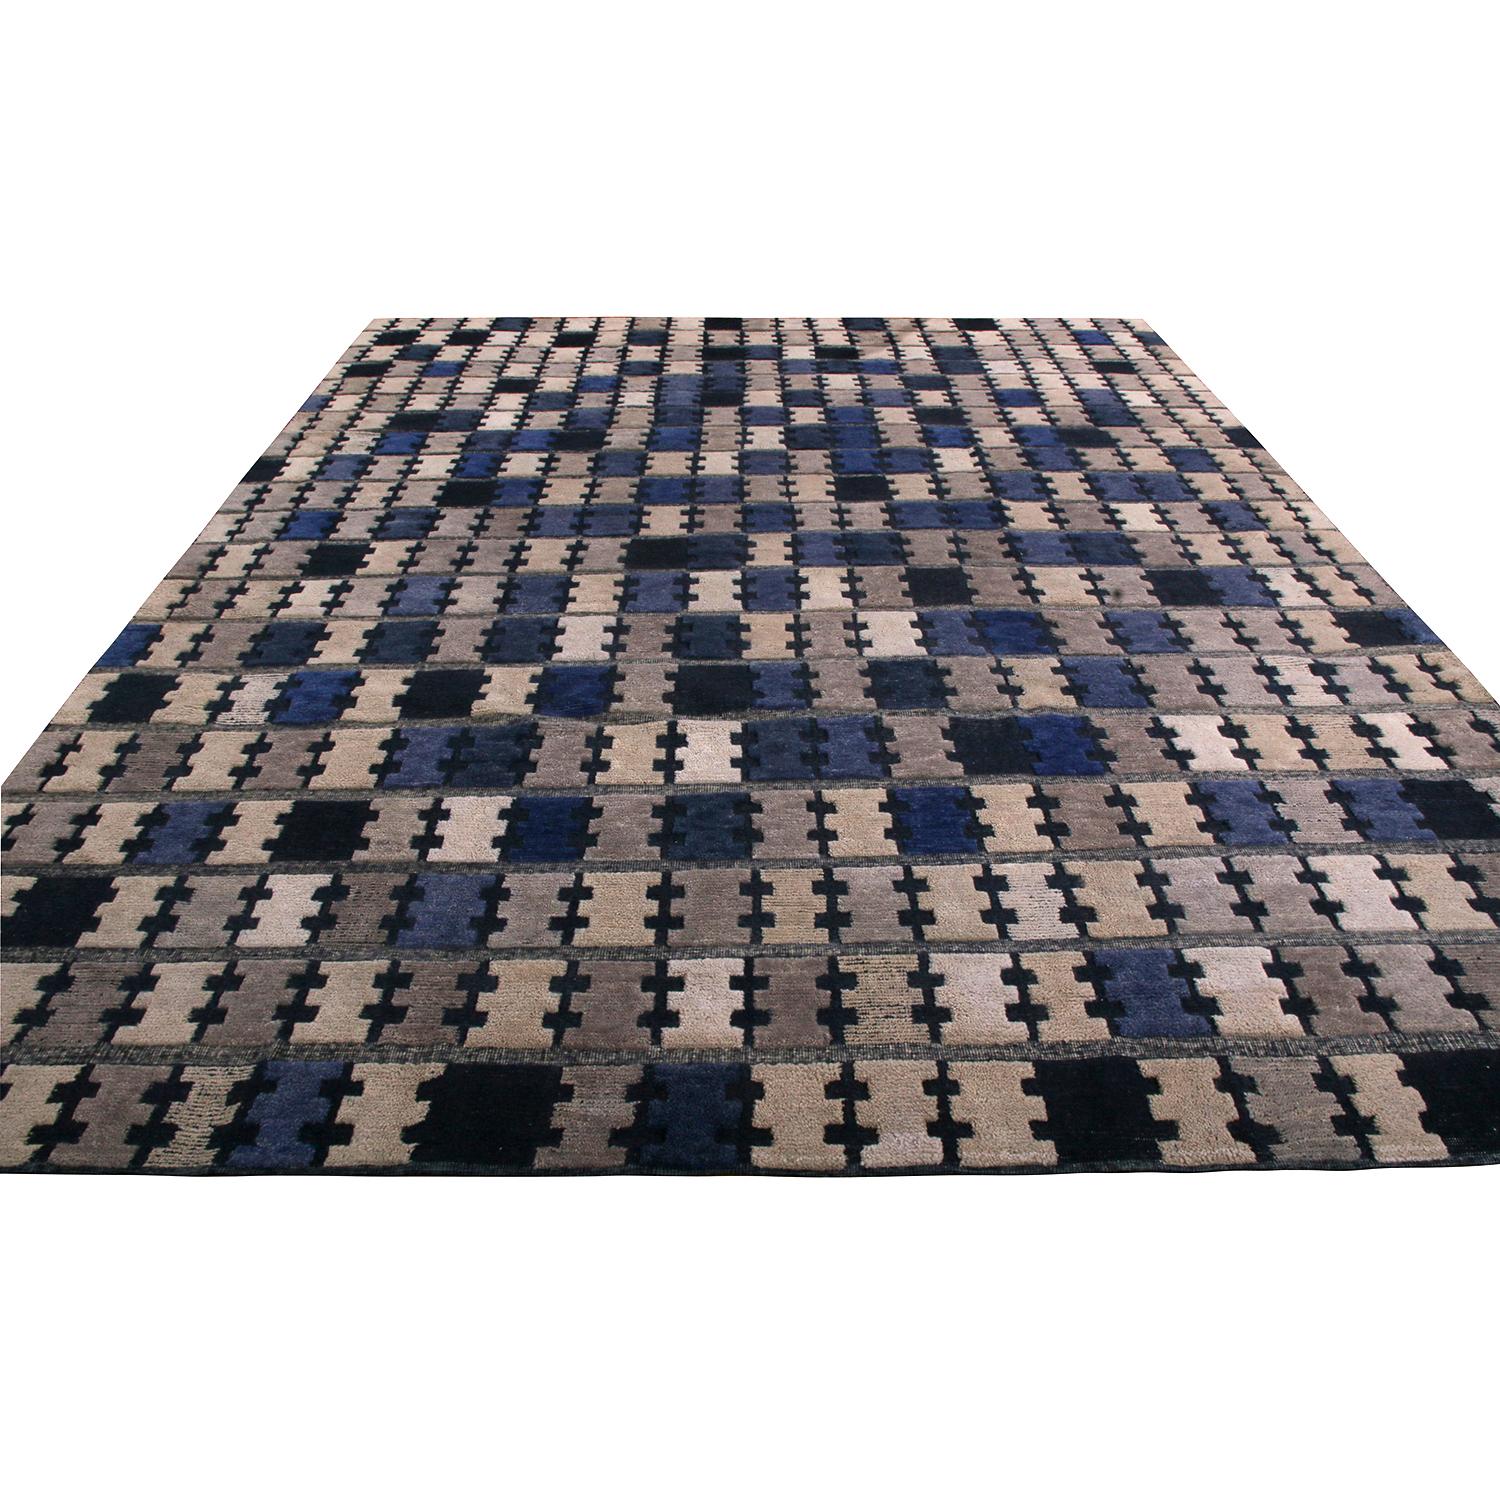 Hand knotted in texturally soft, inviting wool, this modern 9 x 12 rug hails from the latest additions to Rug & Kilim’s Scandinavian Collection, a celebration of Swedish modernism with new large-scale geometry and exciting vintage colorways like